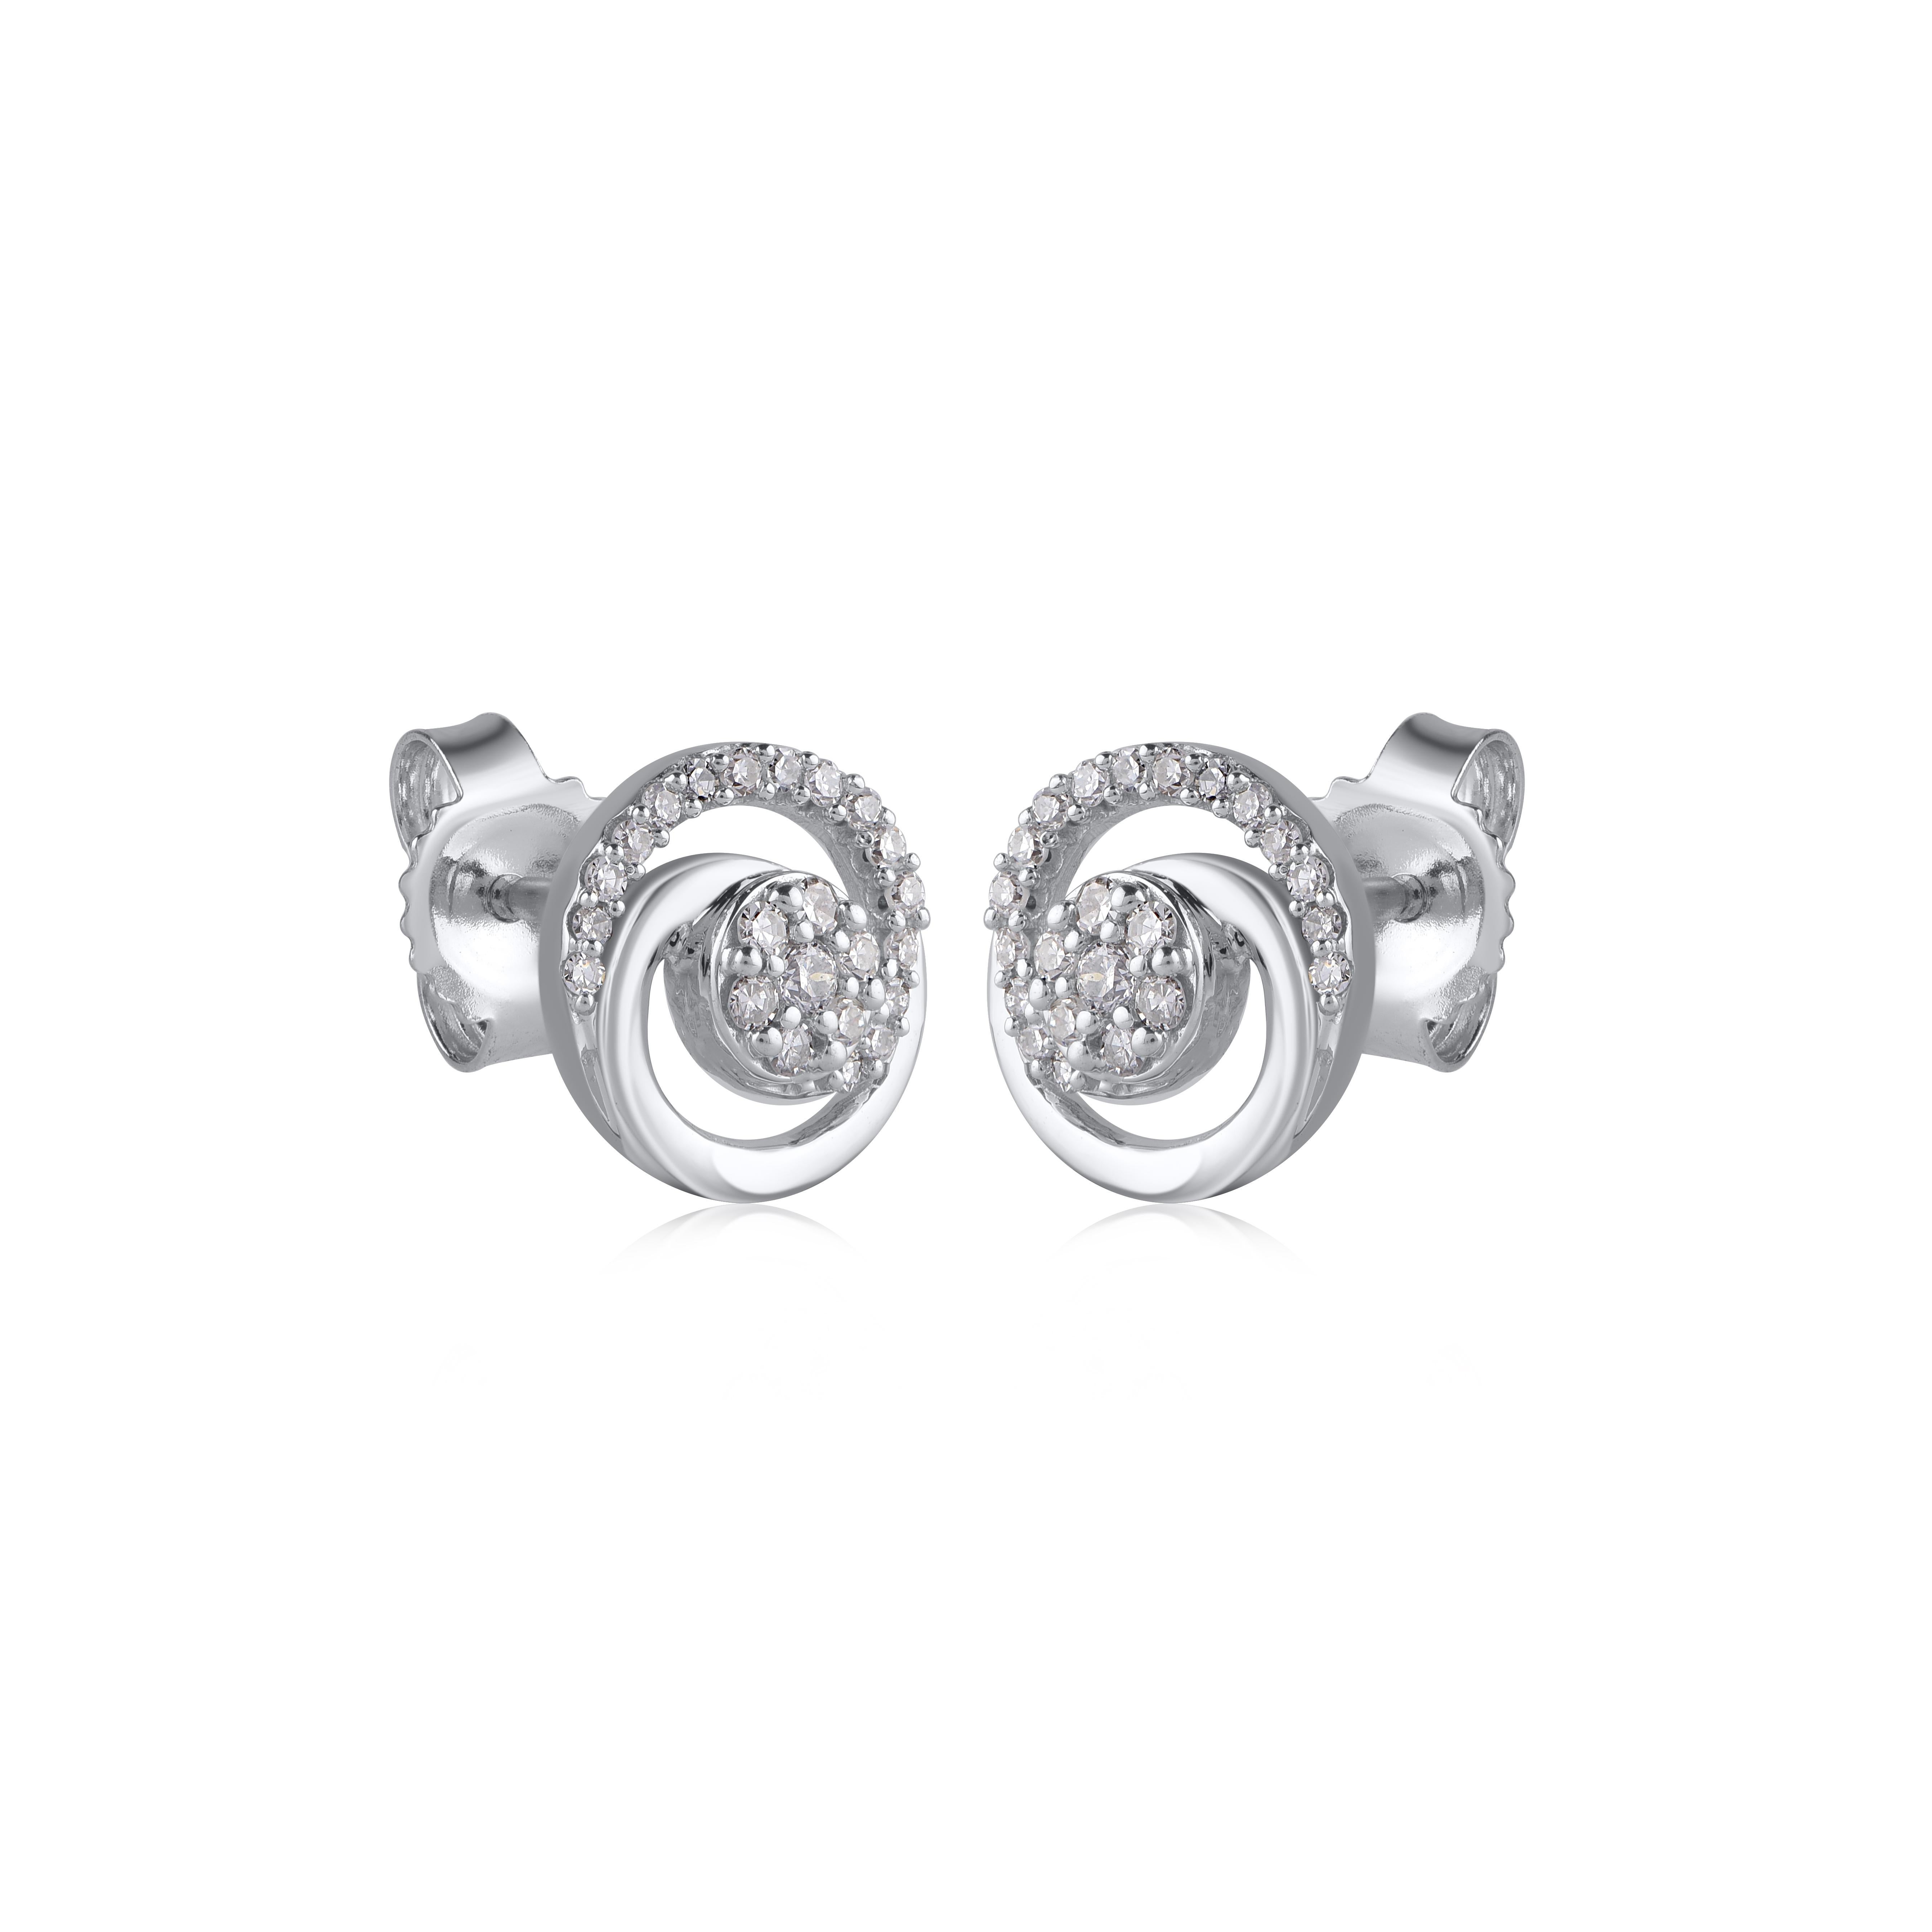 Timeless and elegant, these diamond stud earring are a style you'll wear with every look in your wardrobe. This earring is beautifully designed and studded with 46 natural brilliant and single cut diamond set in prong setting. We only use natural,